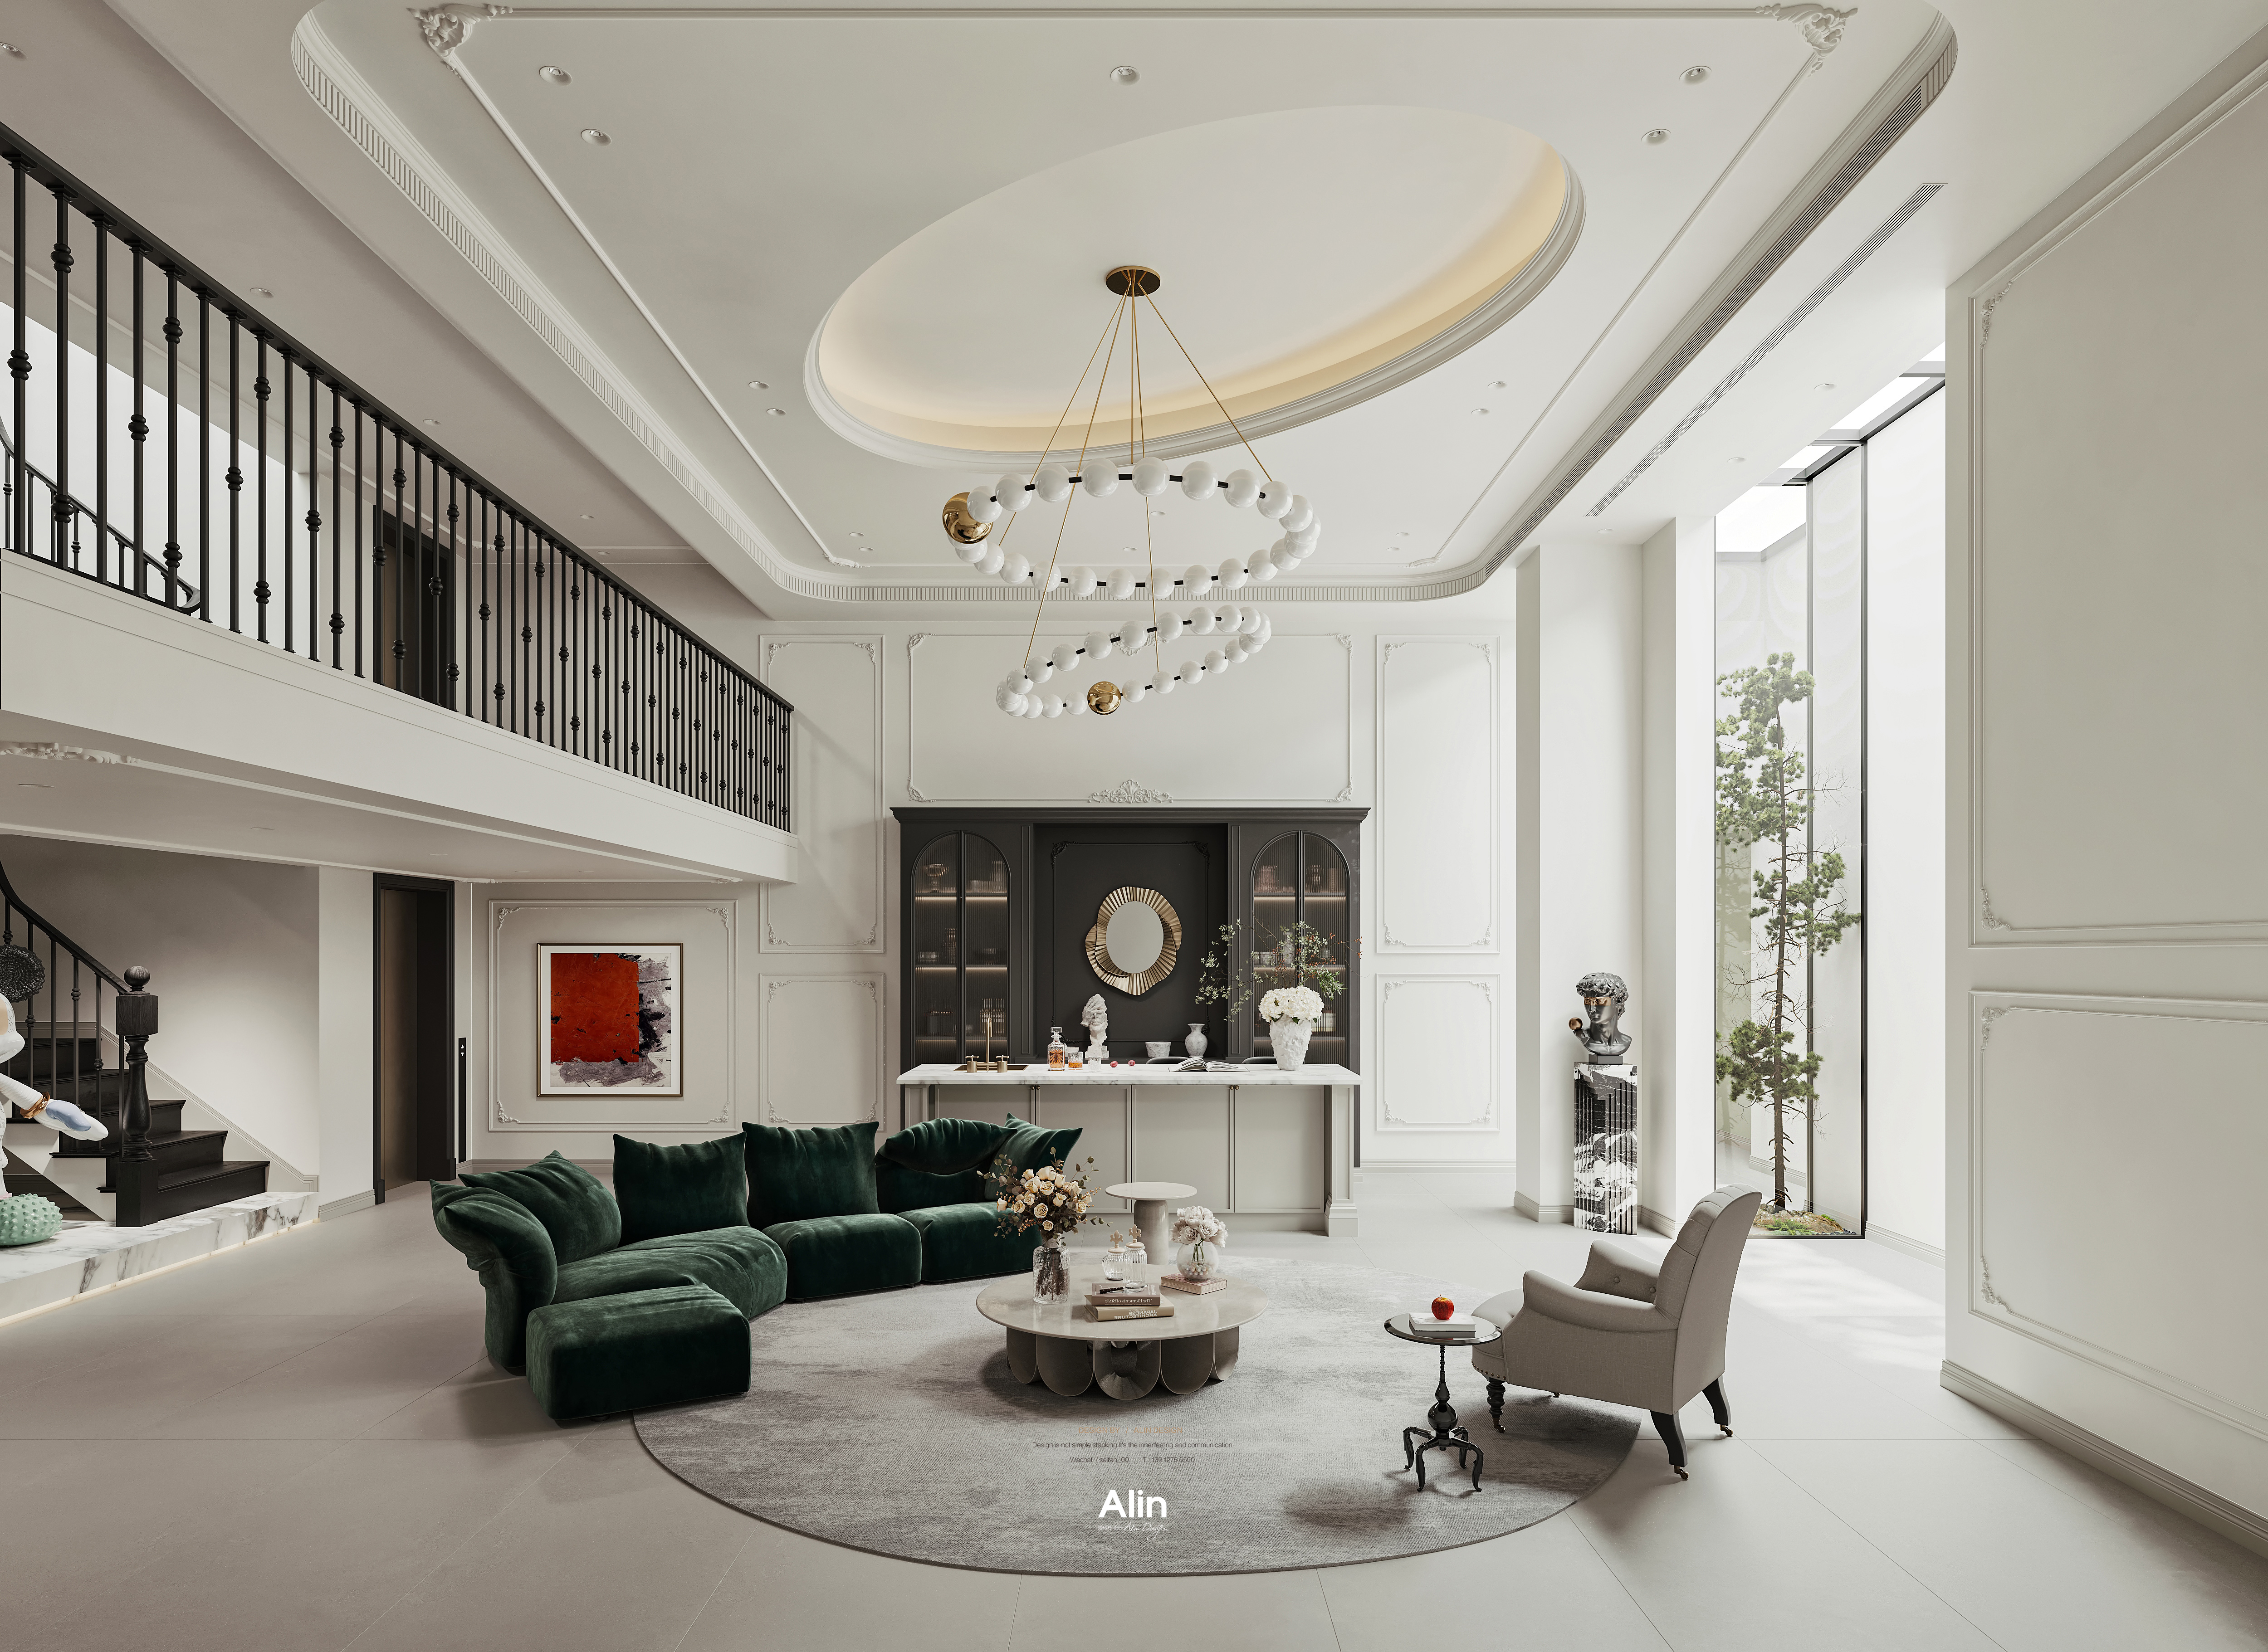  A-Lin Studio French Romantic X Art Order The so-called residence is not only the embodiment of the quality of life, but also the destination of the soul. In the busy city, we are eager to find a peaceful and warm place to relax and comfort our tired body and mind. Heavy